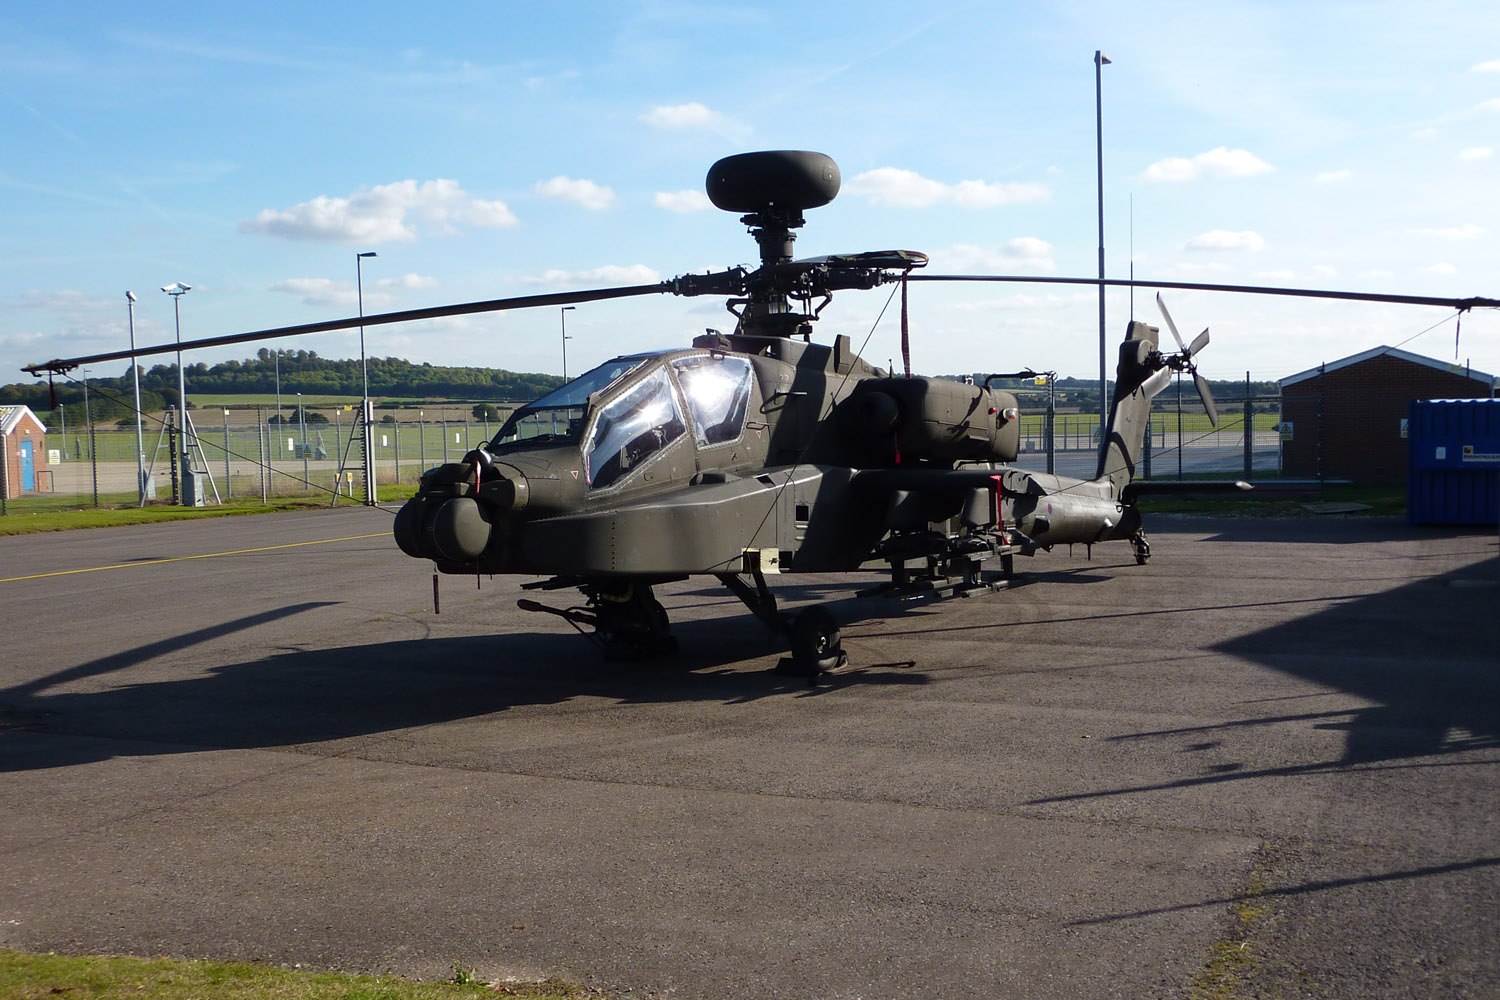 ZJ206 at Middle Wallop in October 2009